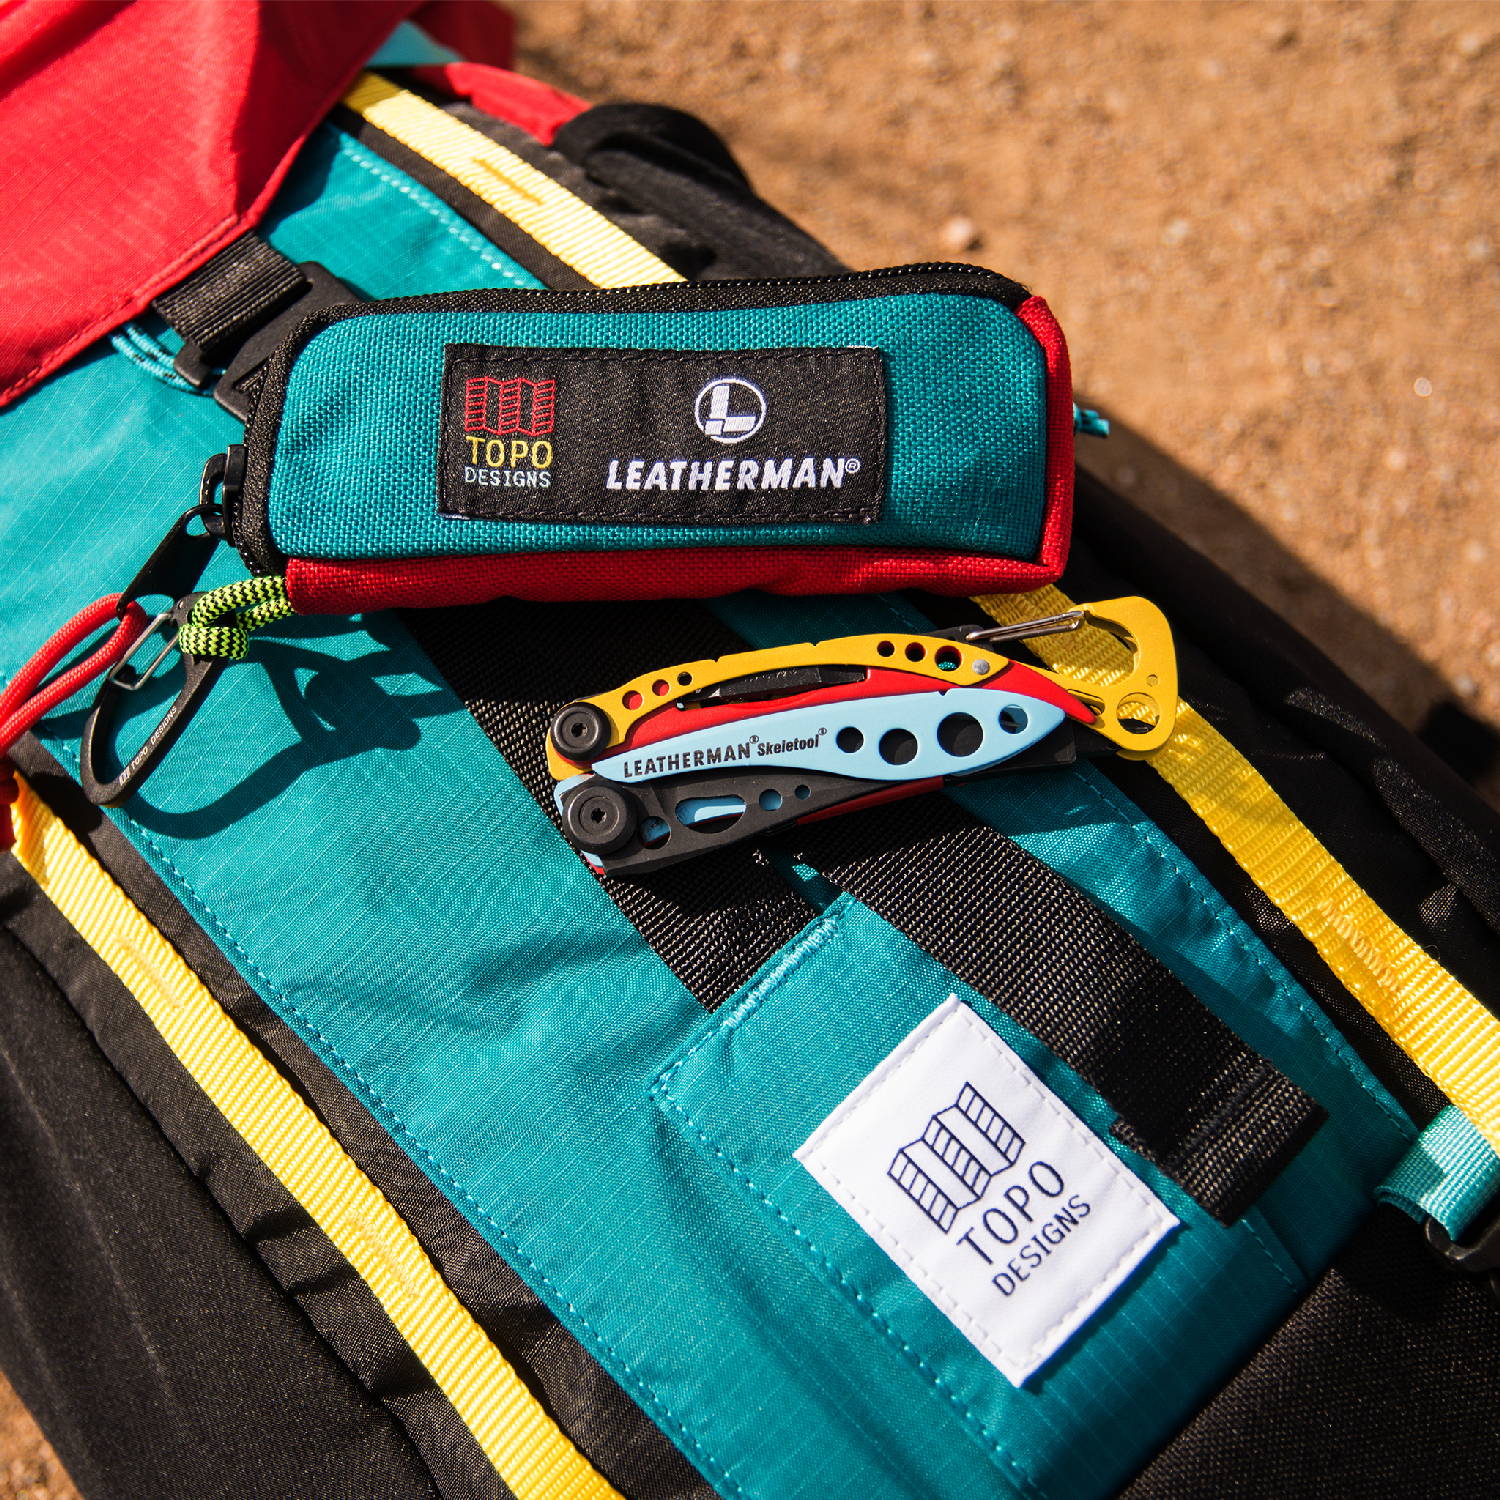 Leatherman x Topo Designs Collab Produces Candy-Colored 'Skeletool